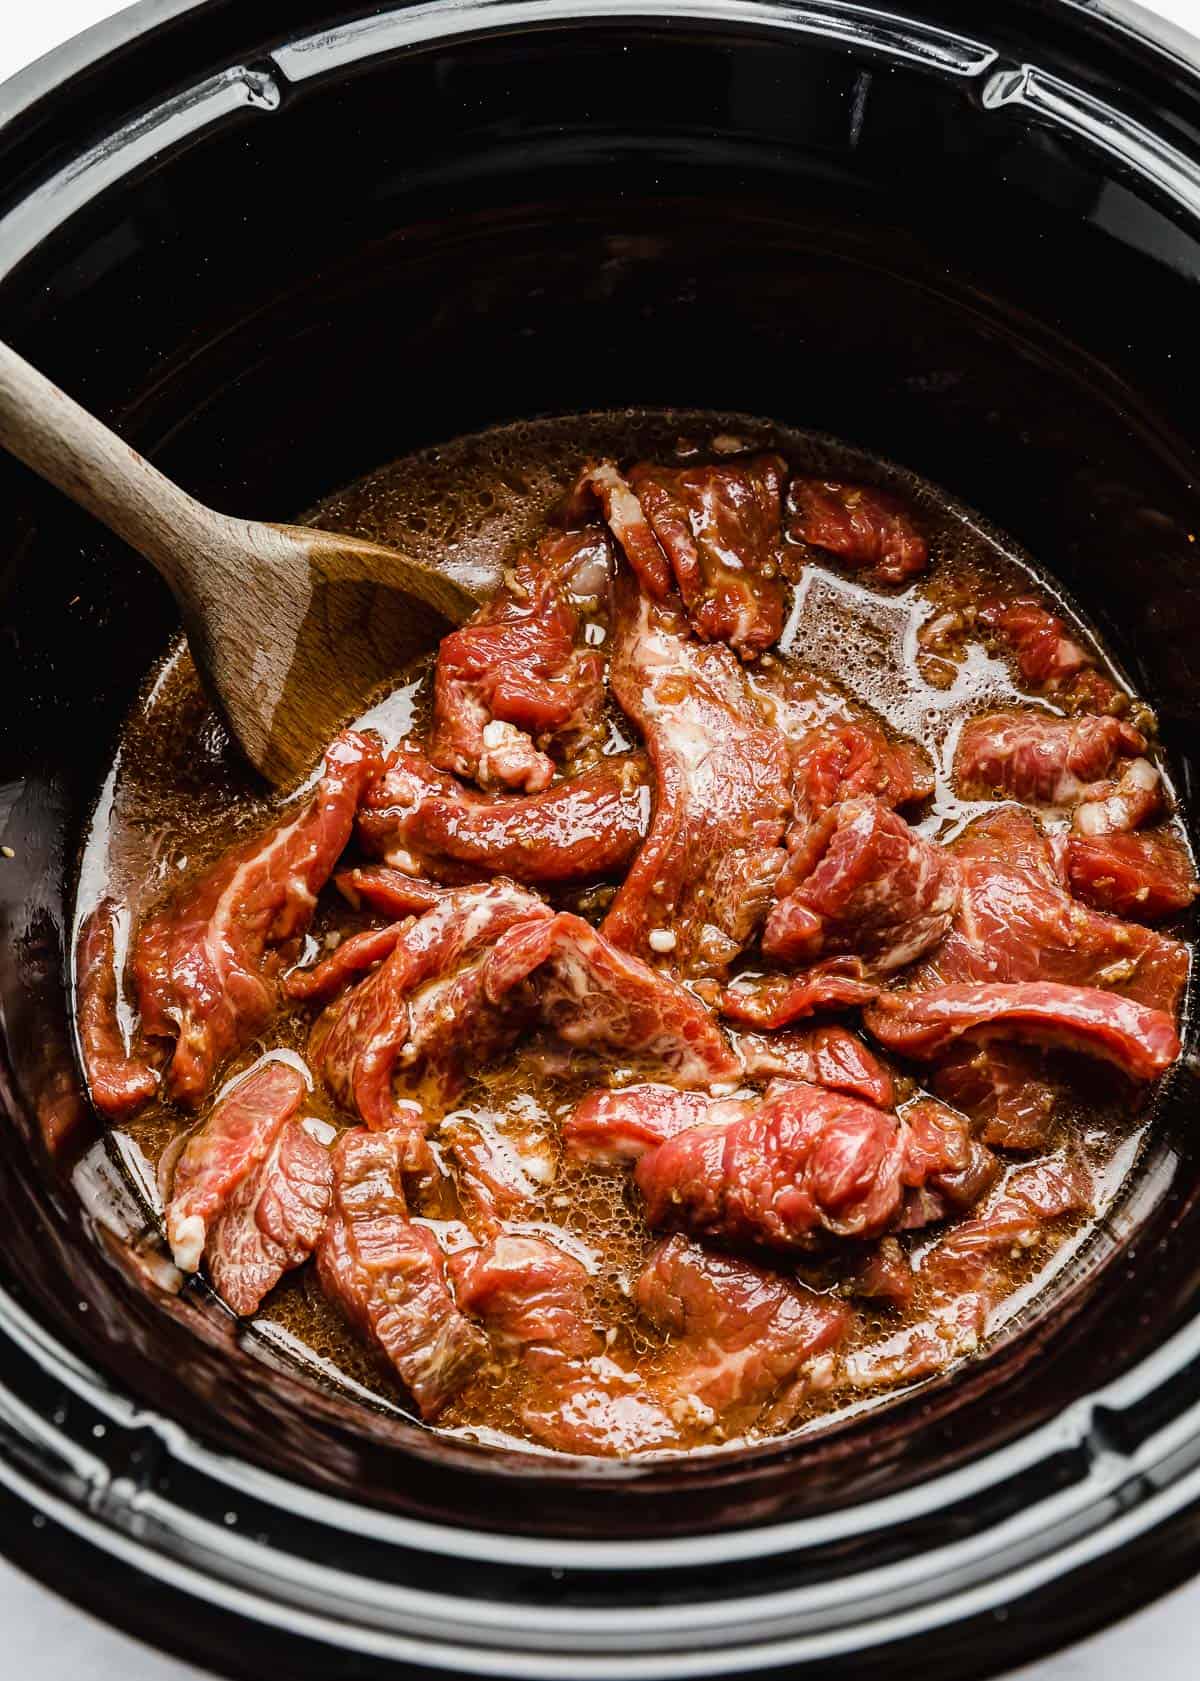 Raw flank steak strips in a slow cooker covered in a brown juice.